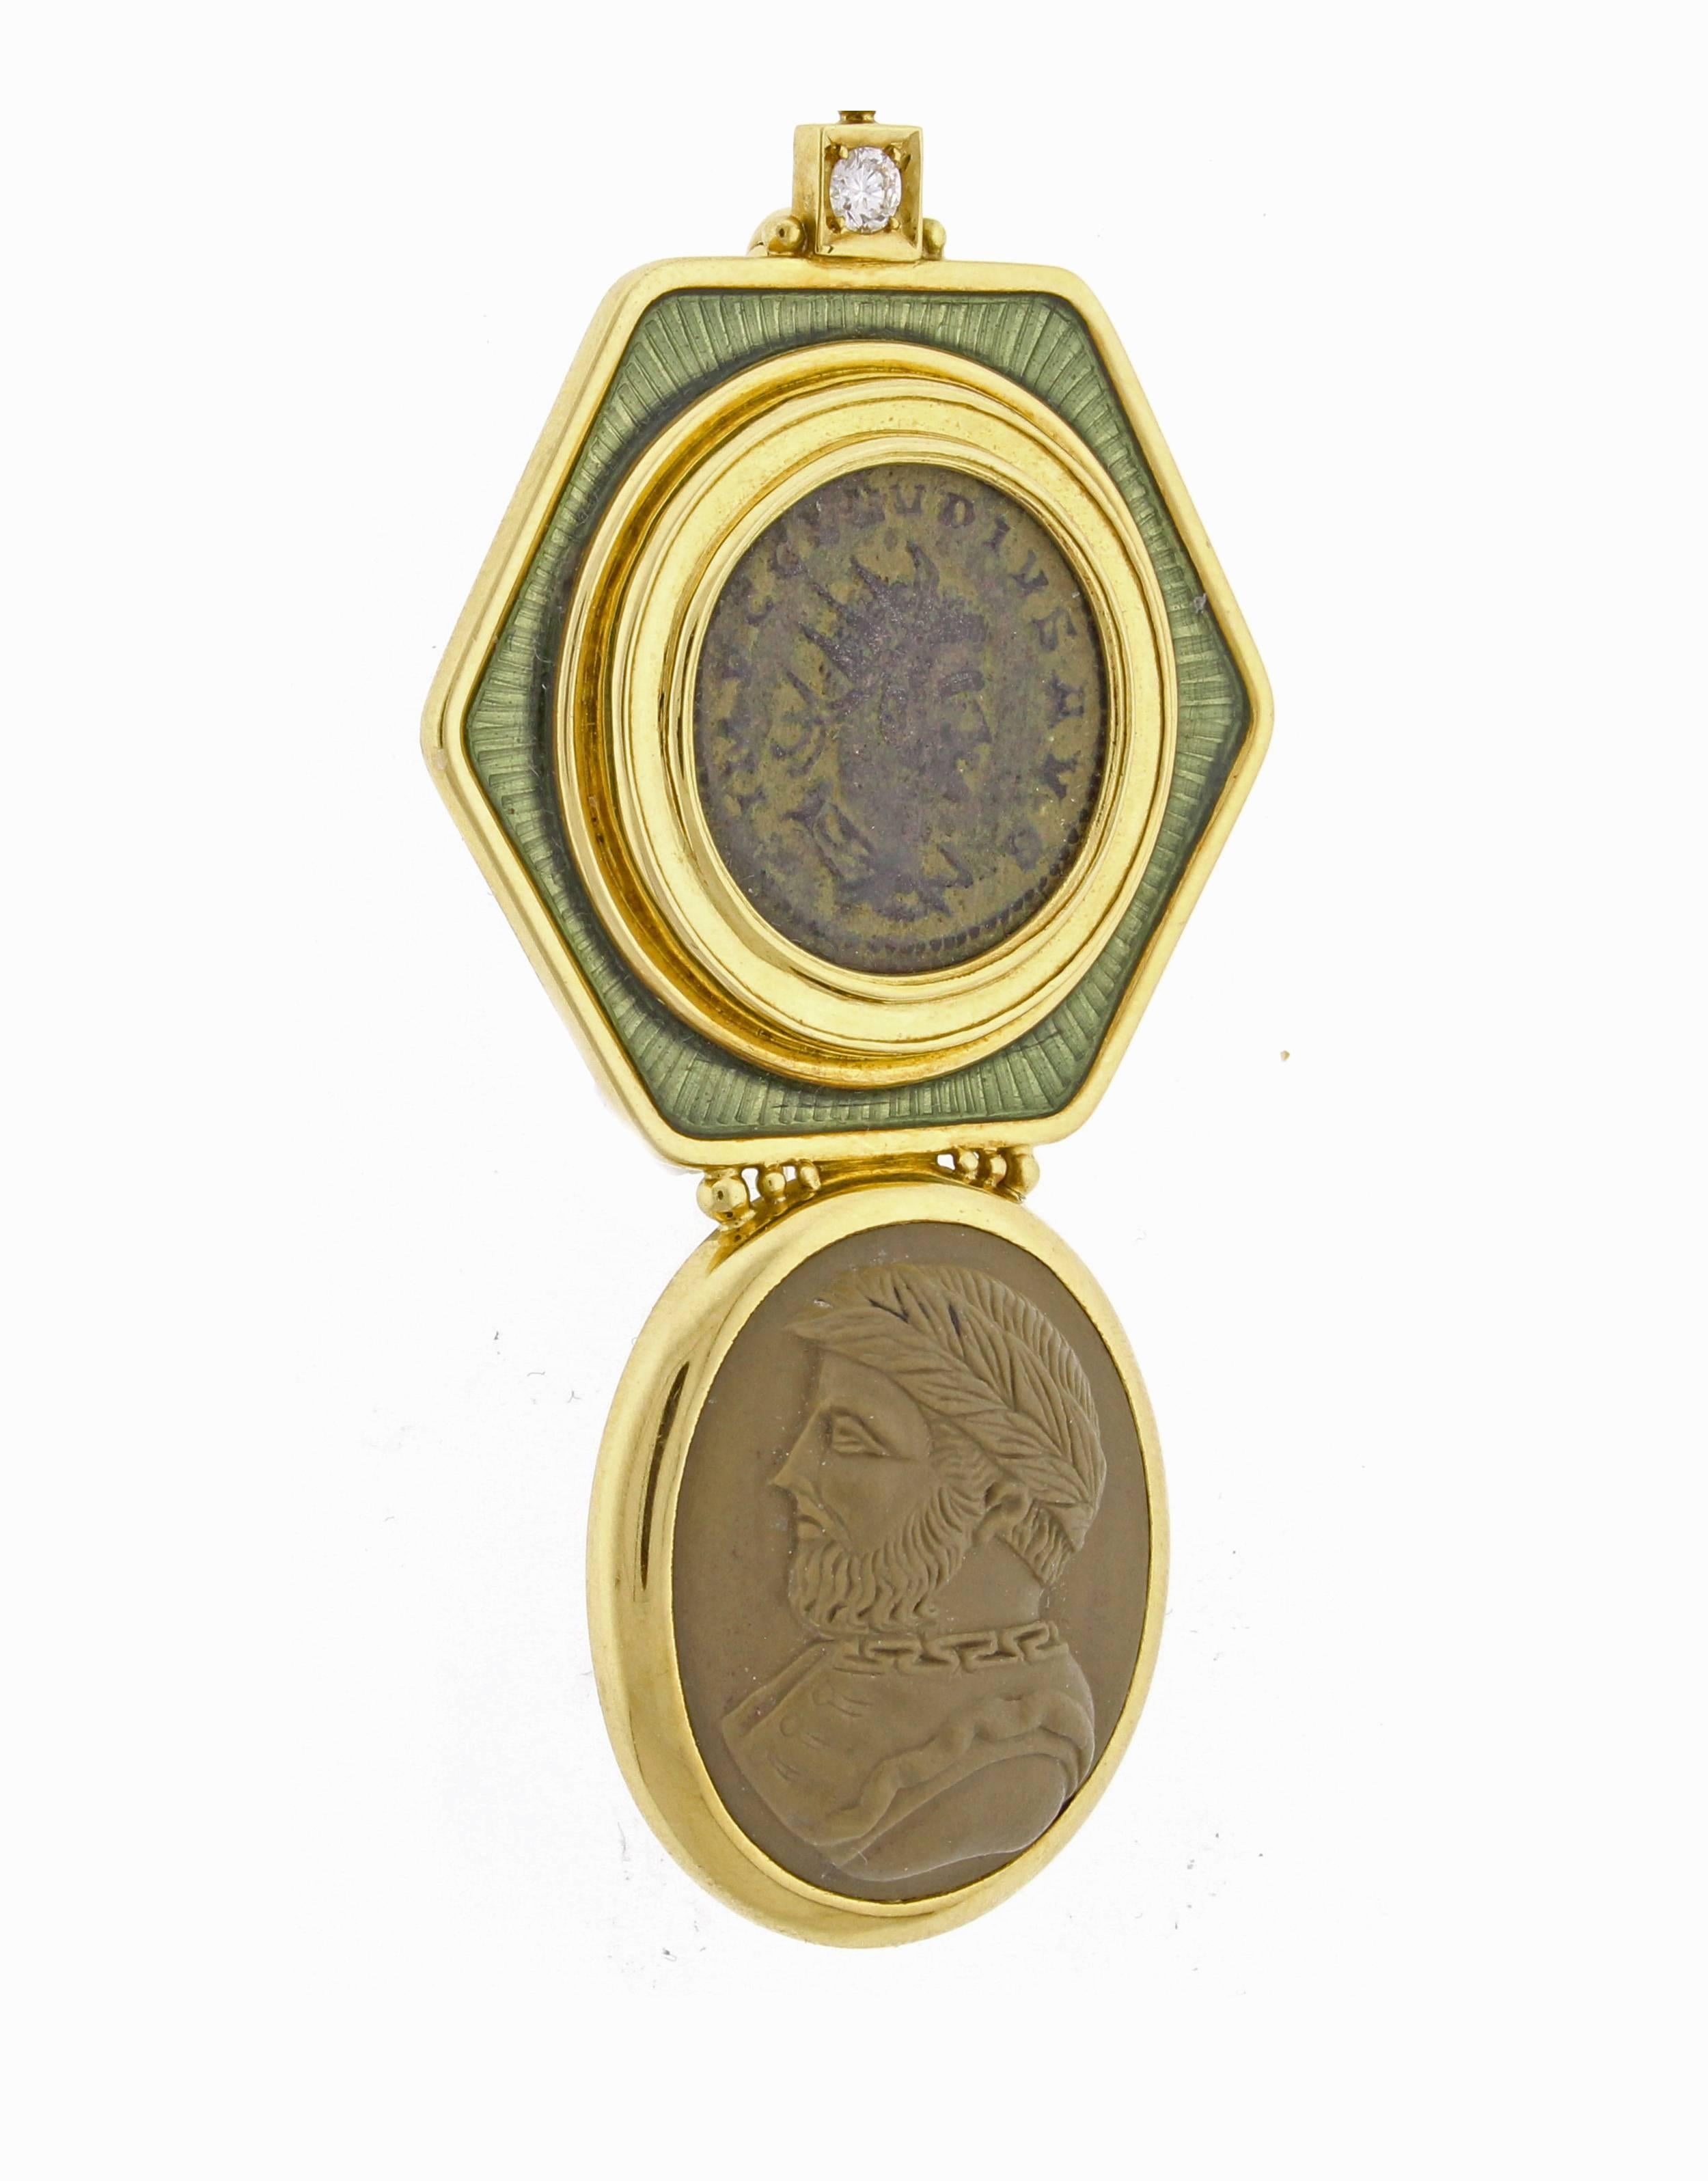 An ancient coin, brilliantly framed with pastel green enamel, sits on top a lava stone cameo in this stunning 18 karat gold brooch by Elizabeth Gage.
